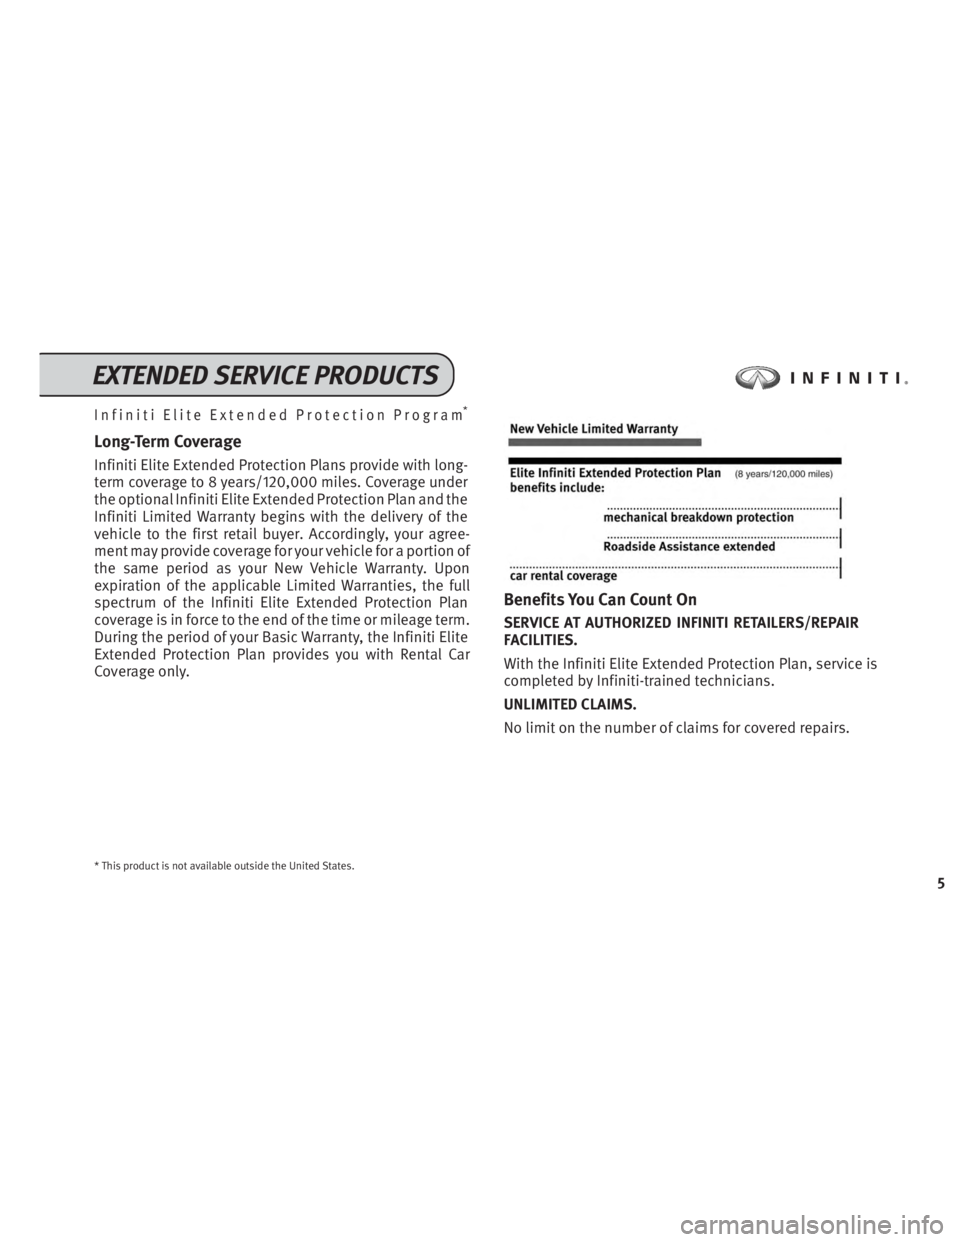 INFINITI QX50 2014  Service And Maintenance Guide Infiniti Elite Extended Protection Program*
Long-Term Coverage
Infiniti Elite Extended Protection Plans provide with long-
term coverage to 8 years/120,000 miles. Coverage under
the optional Infiniti 